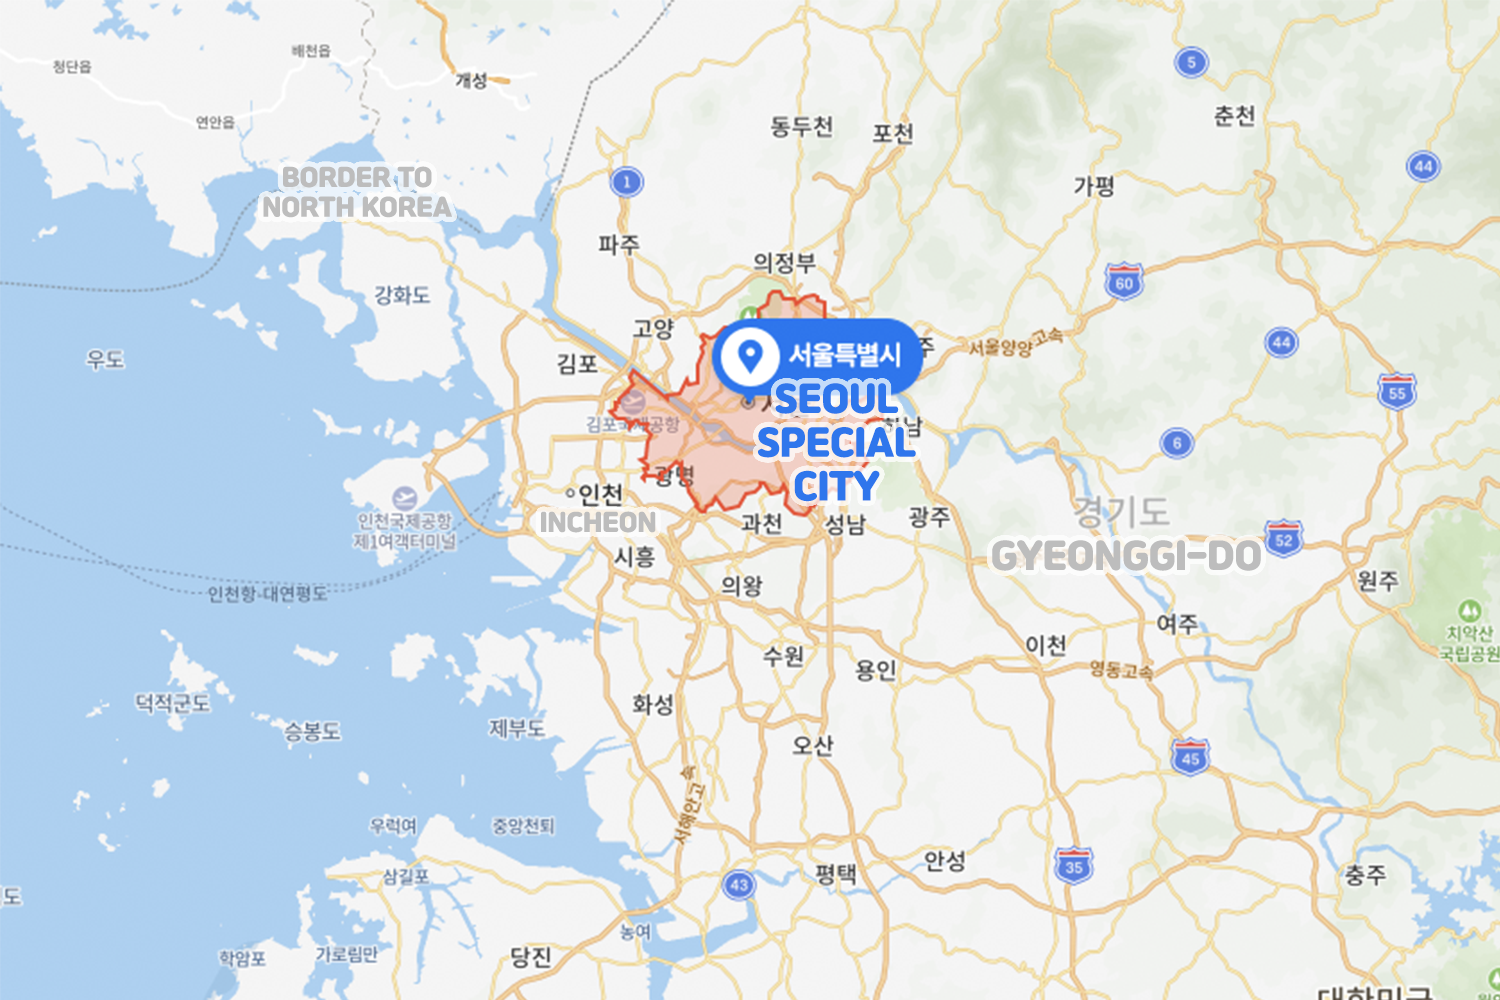 map of seoul special city